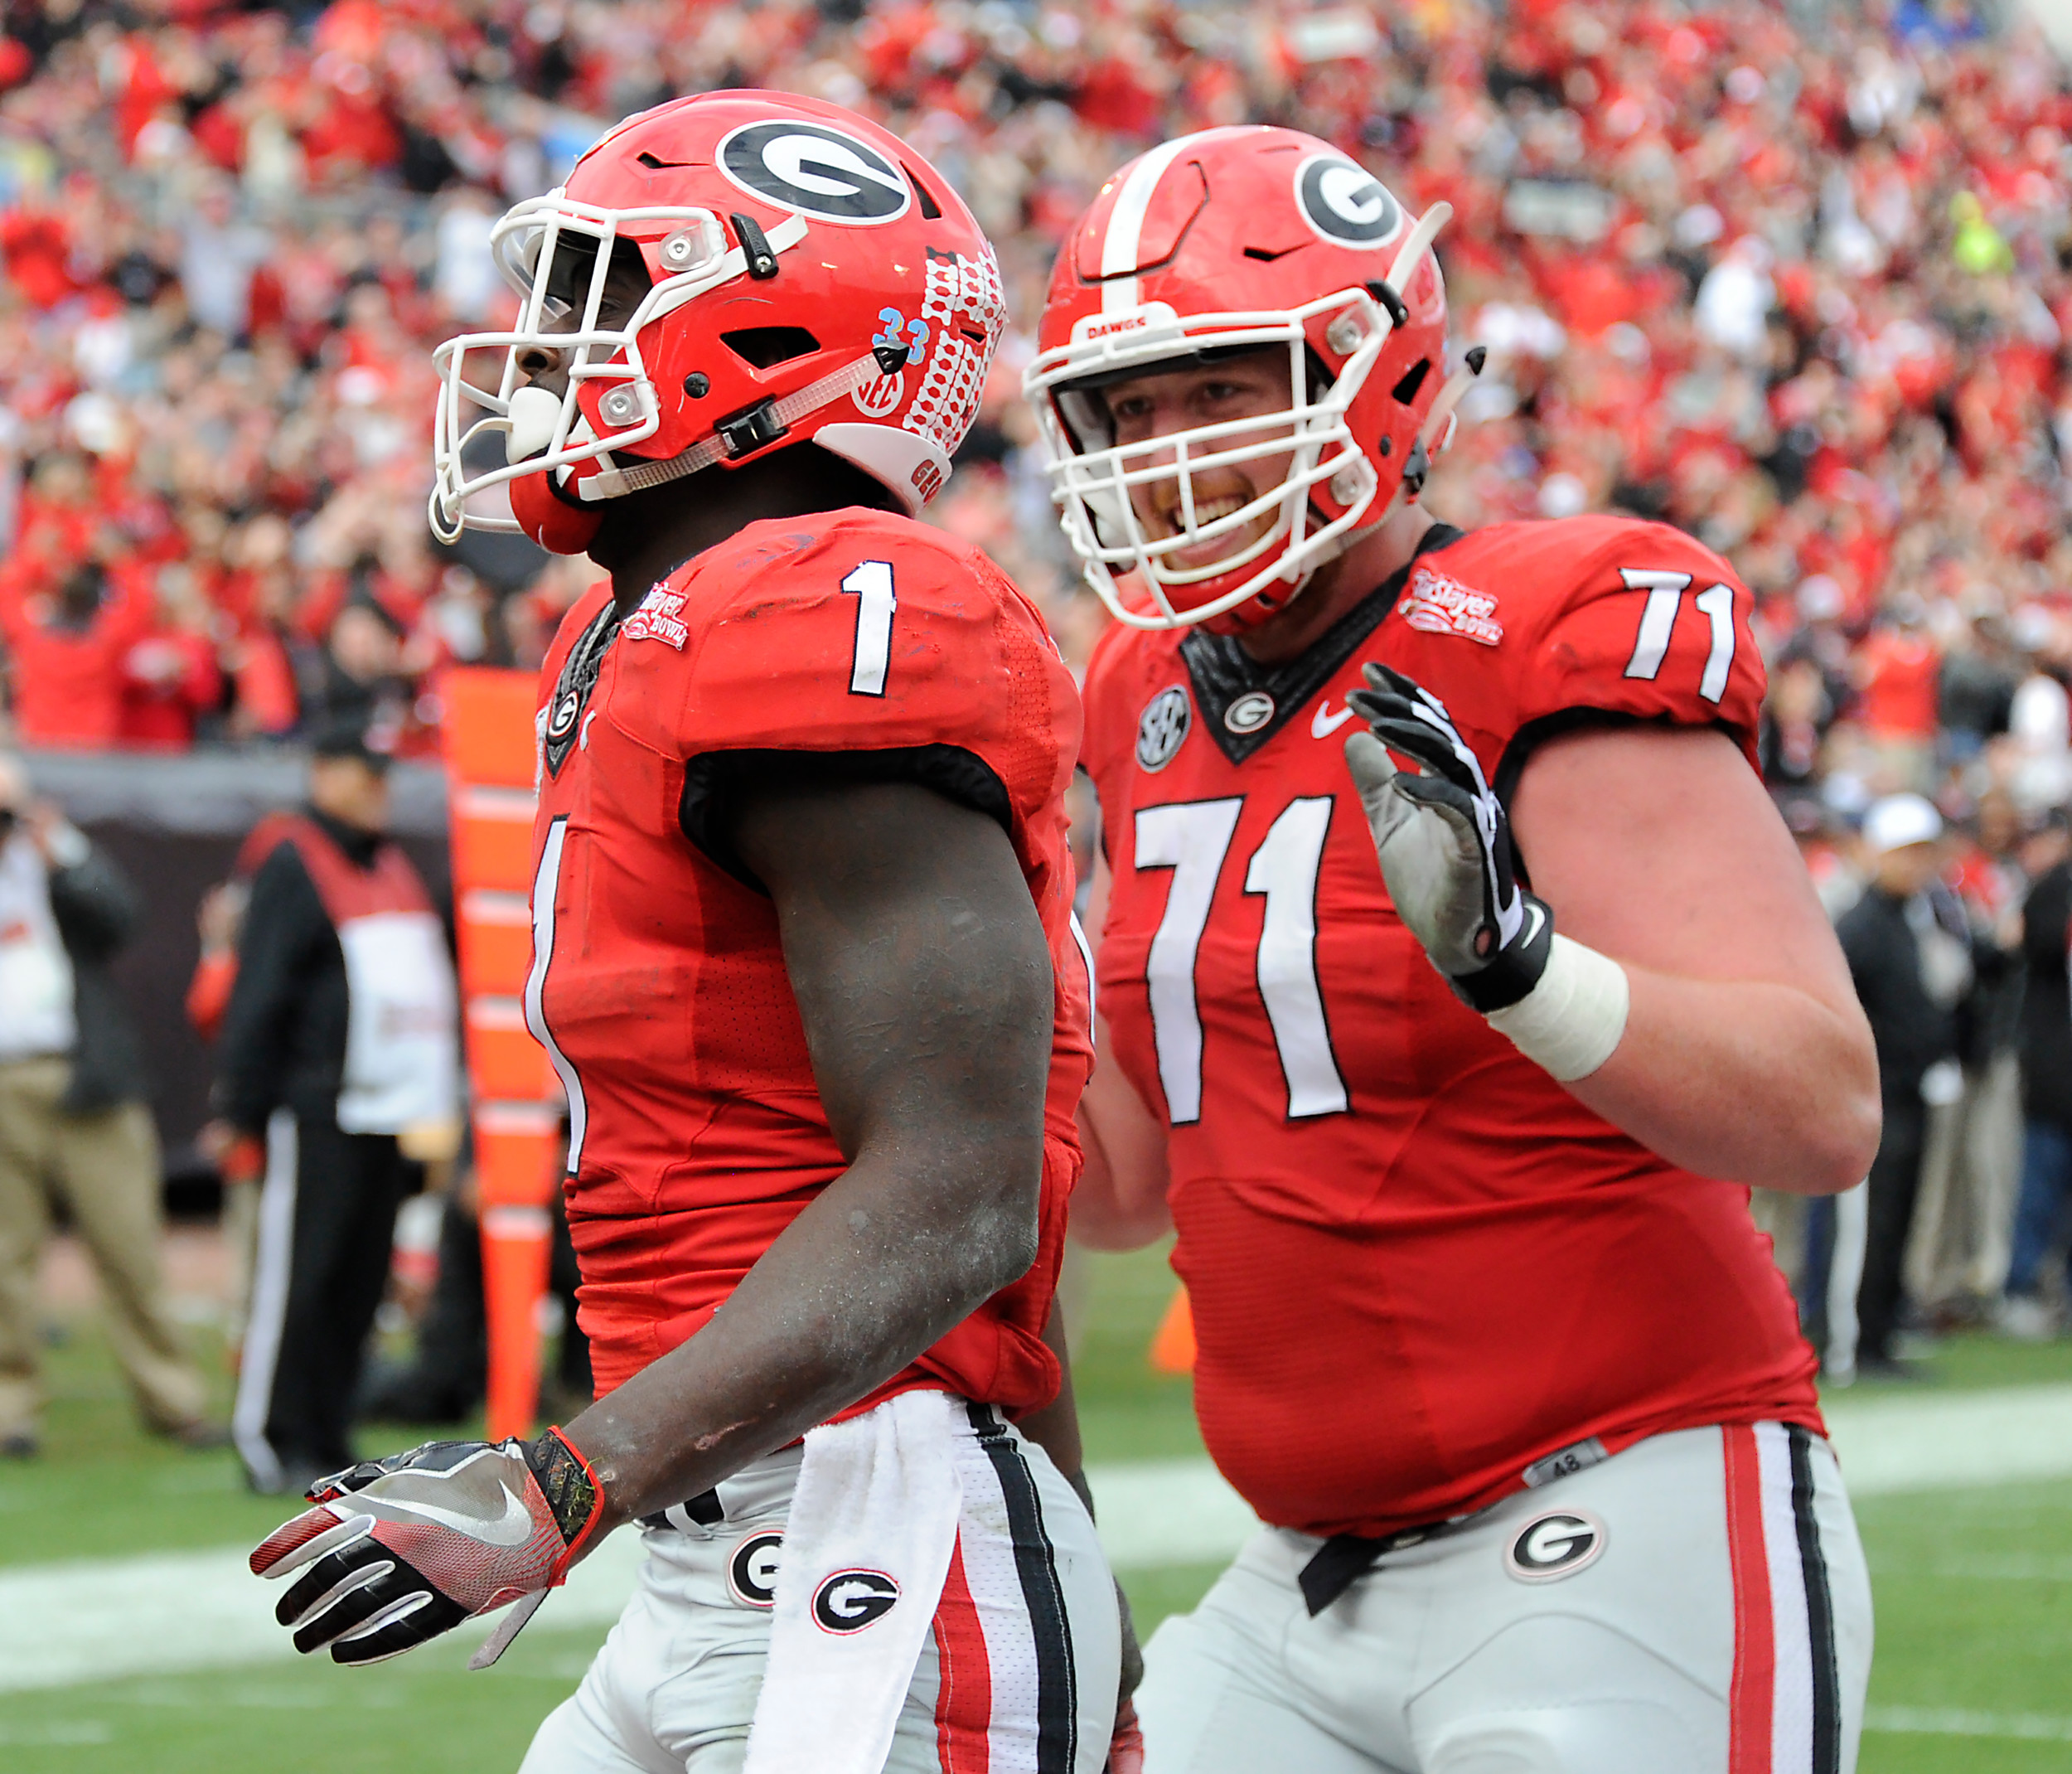 Georgia offensive lineman John Theus (71) from Jacksonville congratulates tailback Sony Michel (1) on his TD against the Penn State in the TaxSlayer Bowl.